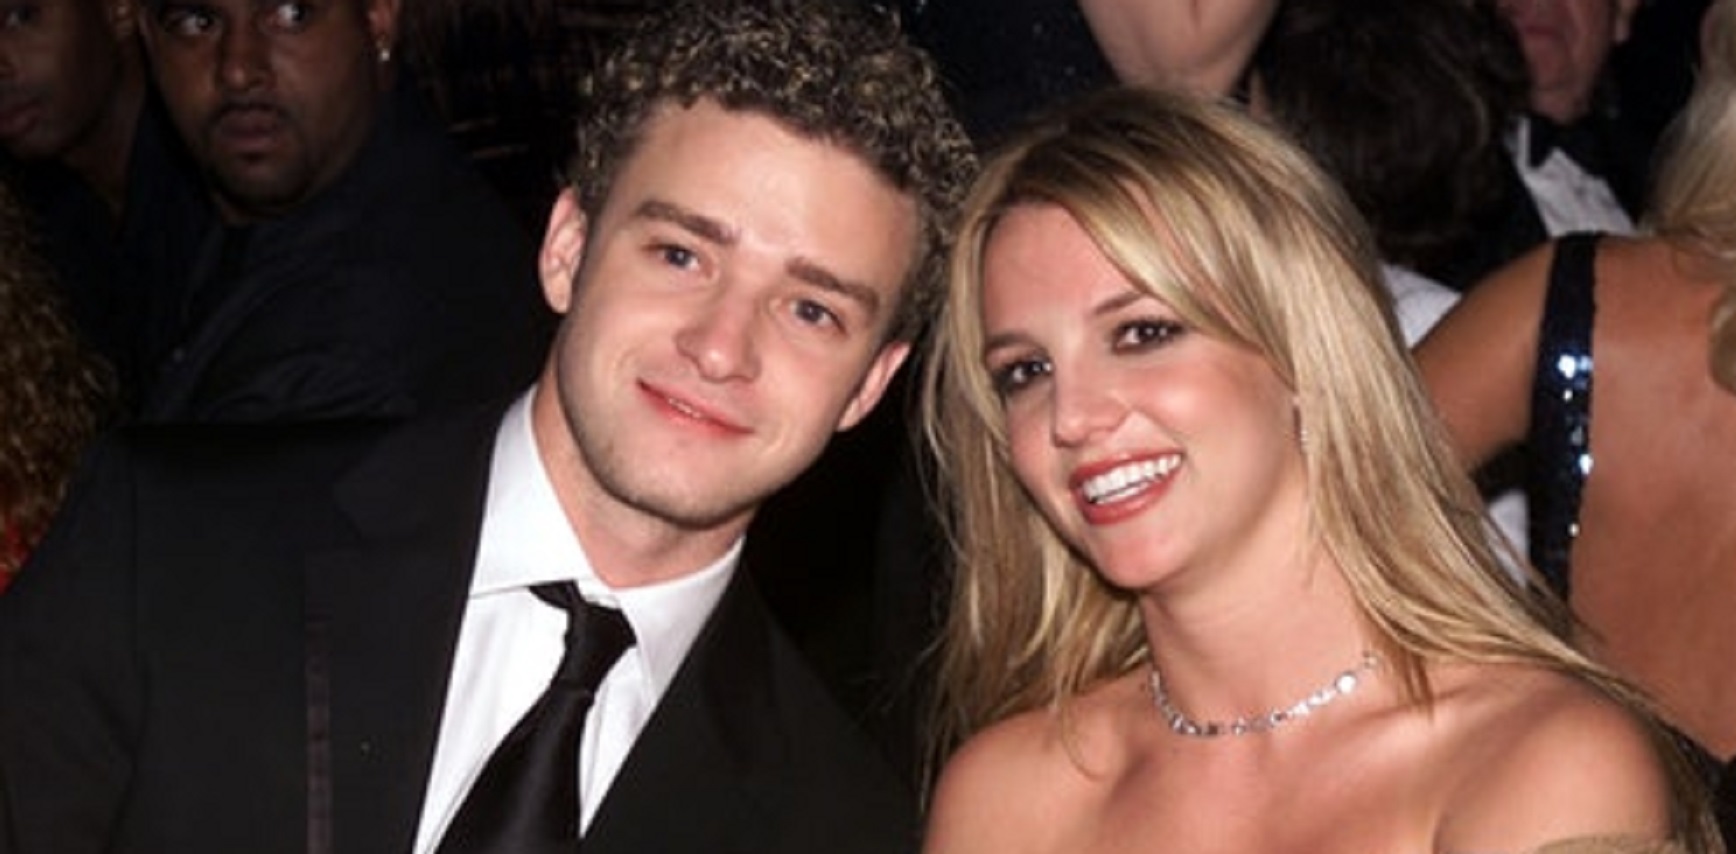 Britney Spears’ Sister Jamie Lynn Shares Flashback Photo of Britney and Her Ex Justin Timberlake